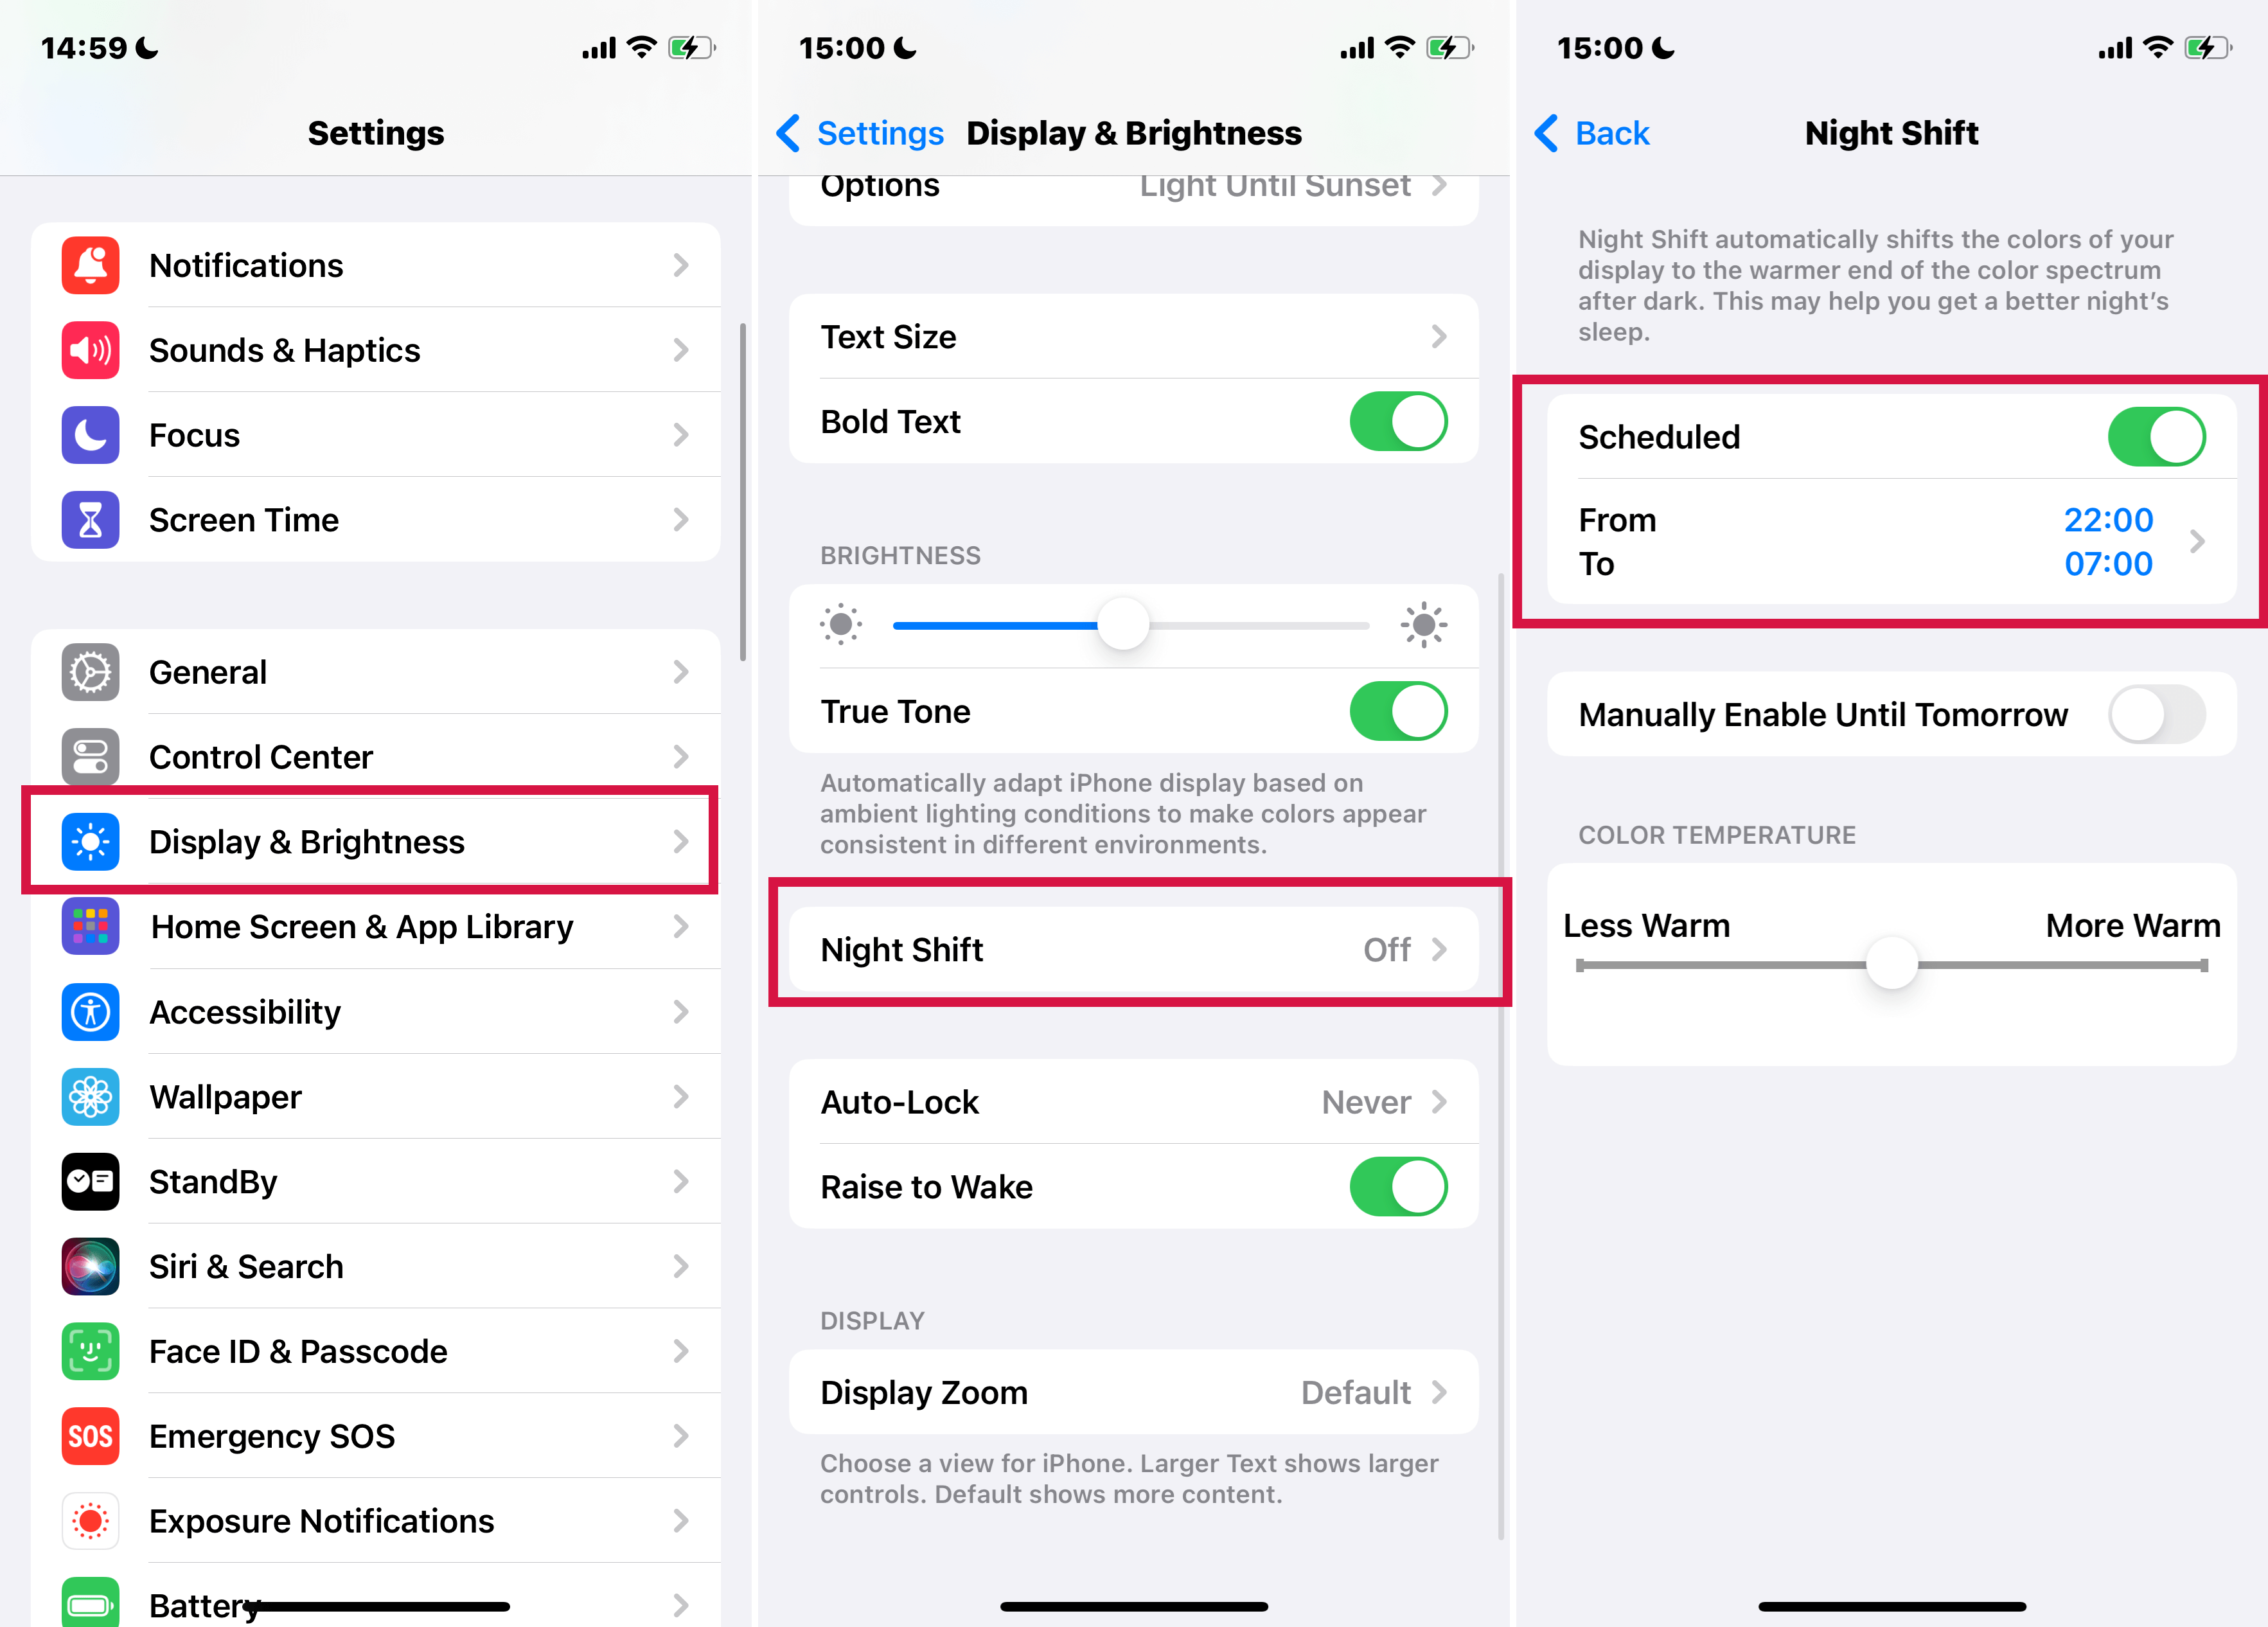 Steps to Schedule Night Shift Automatically on iphone